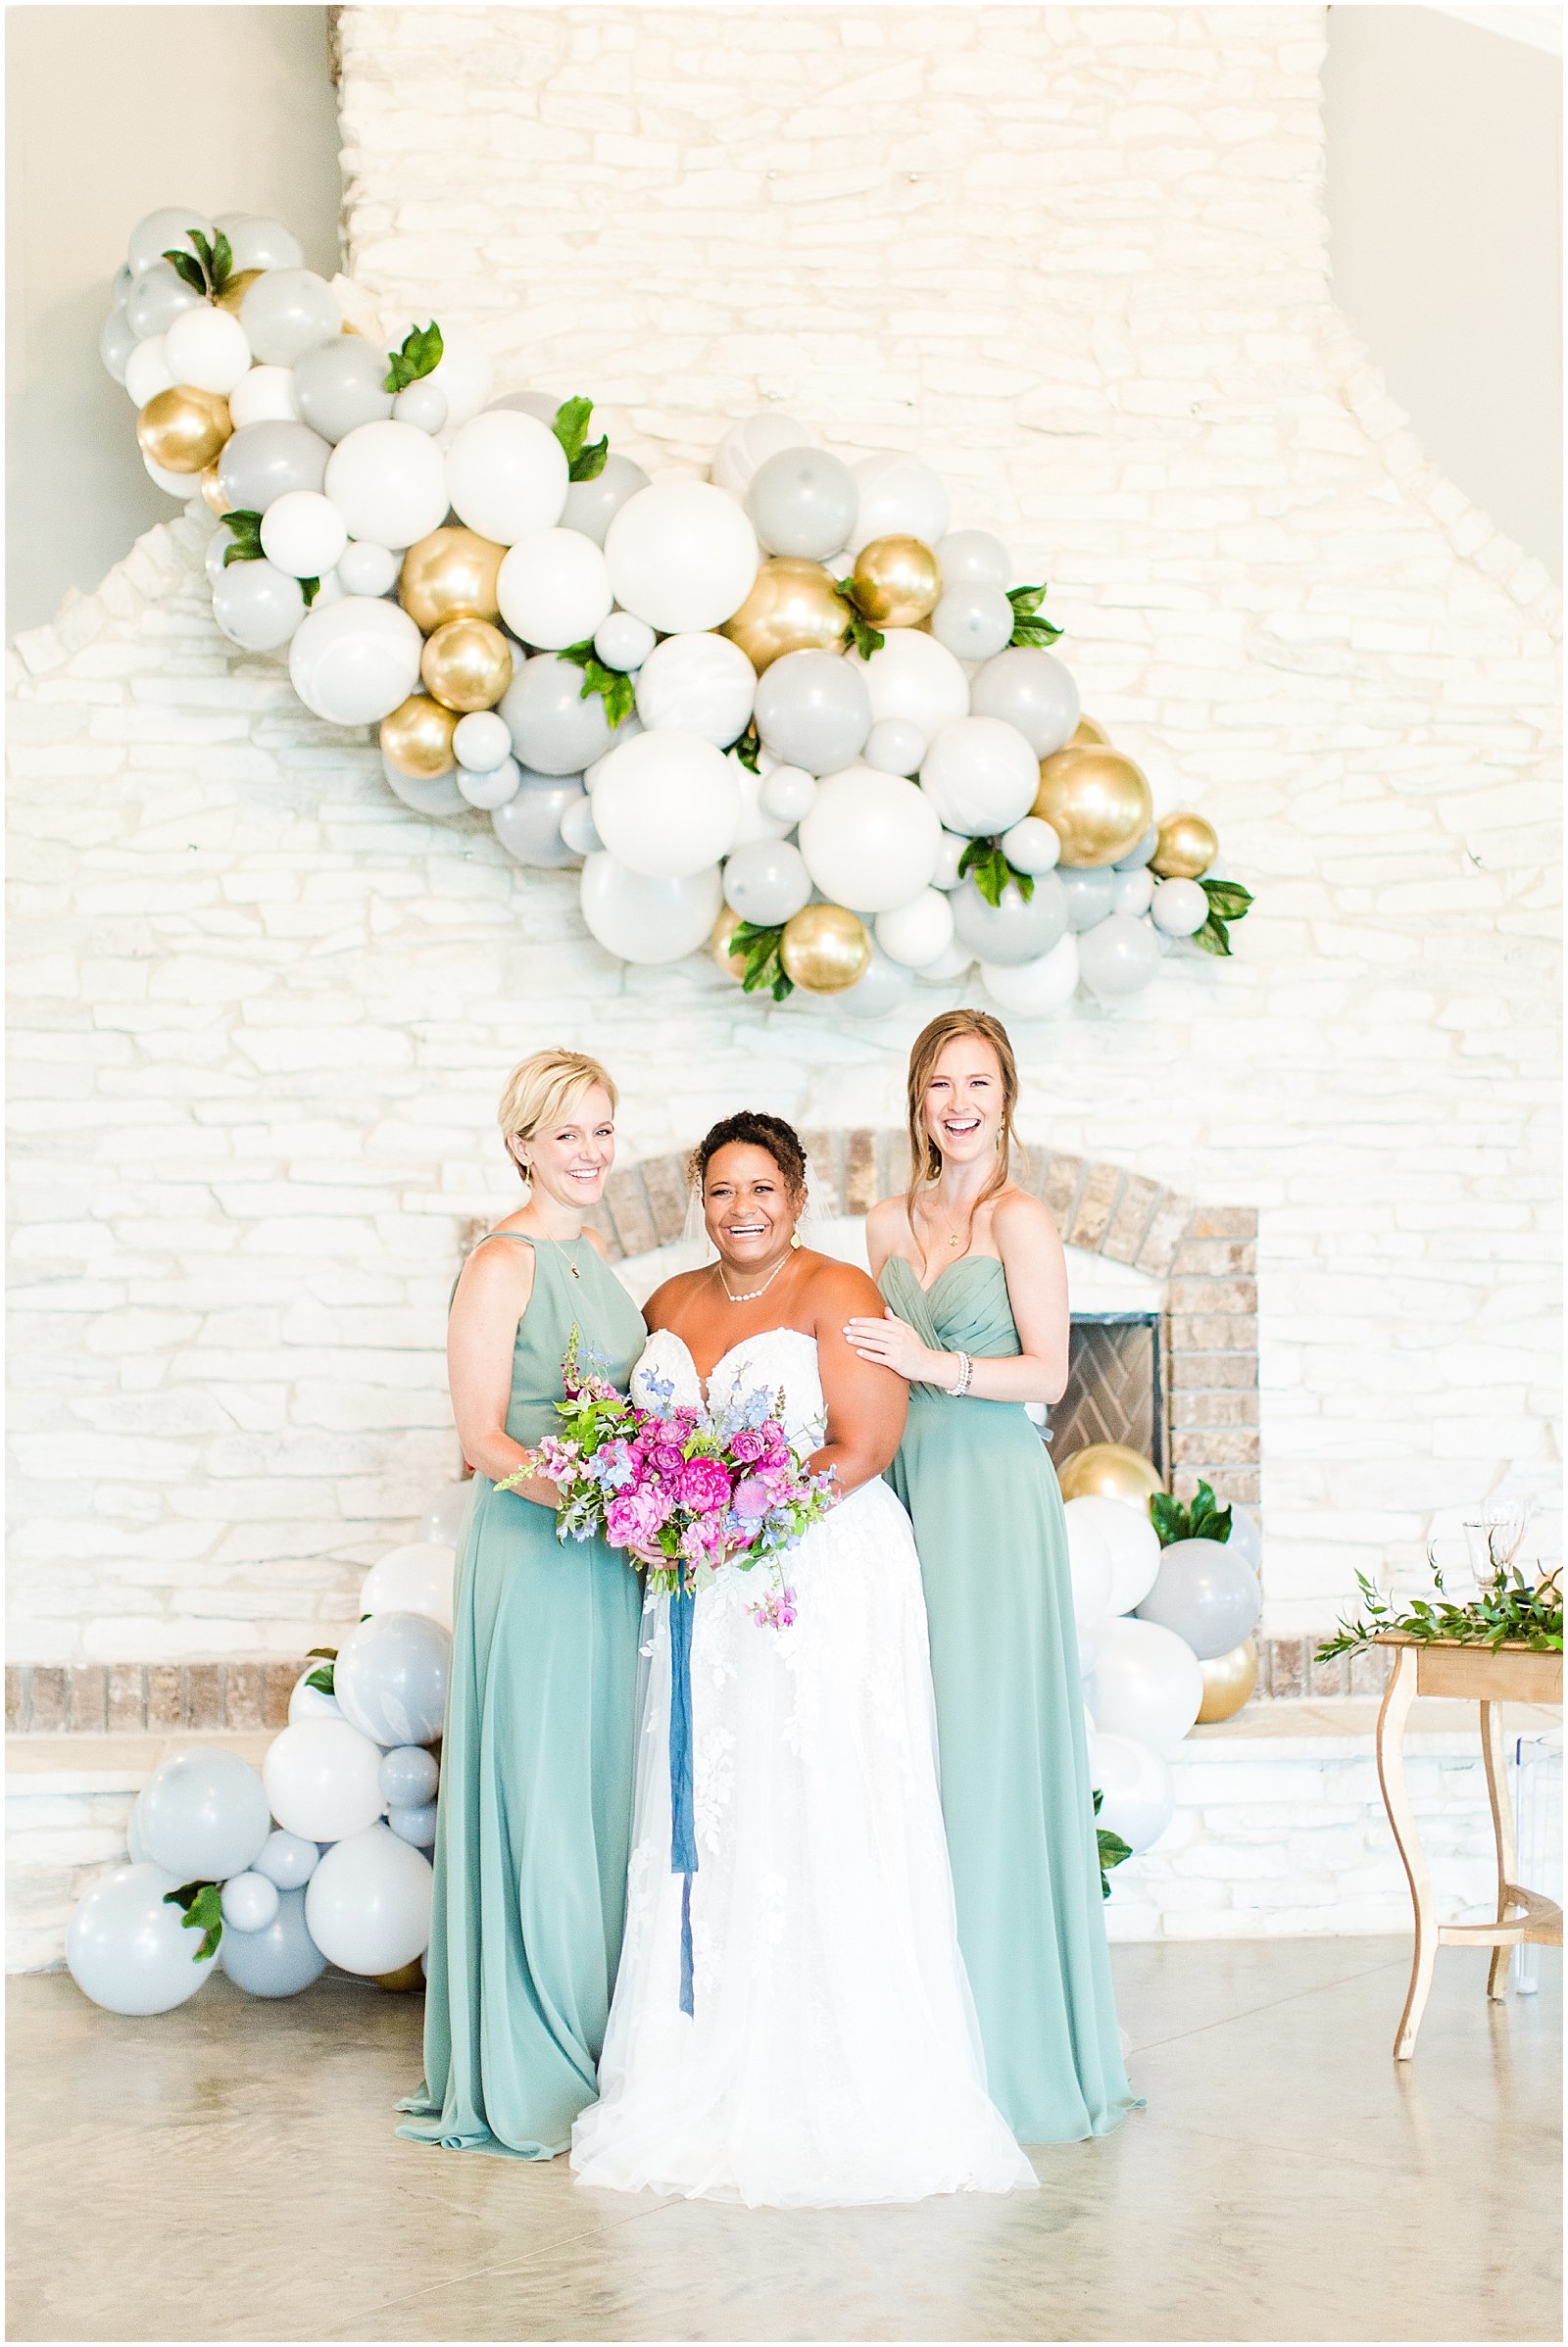 Bret and Brandie Photography | Styled Shoot at White Chateau | Blog 0020.jpg